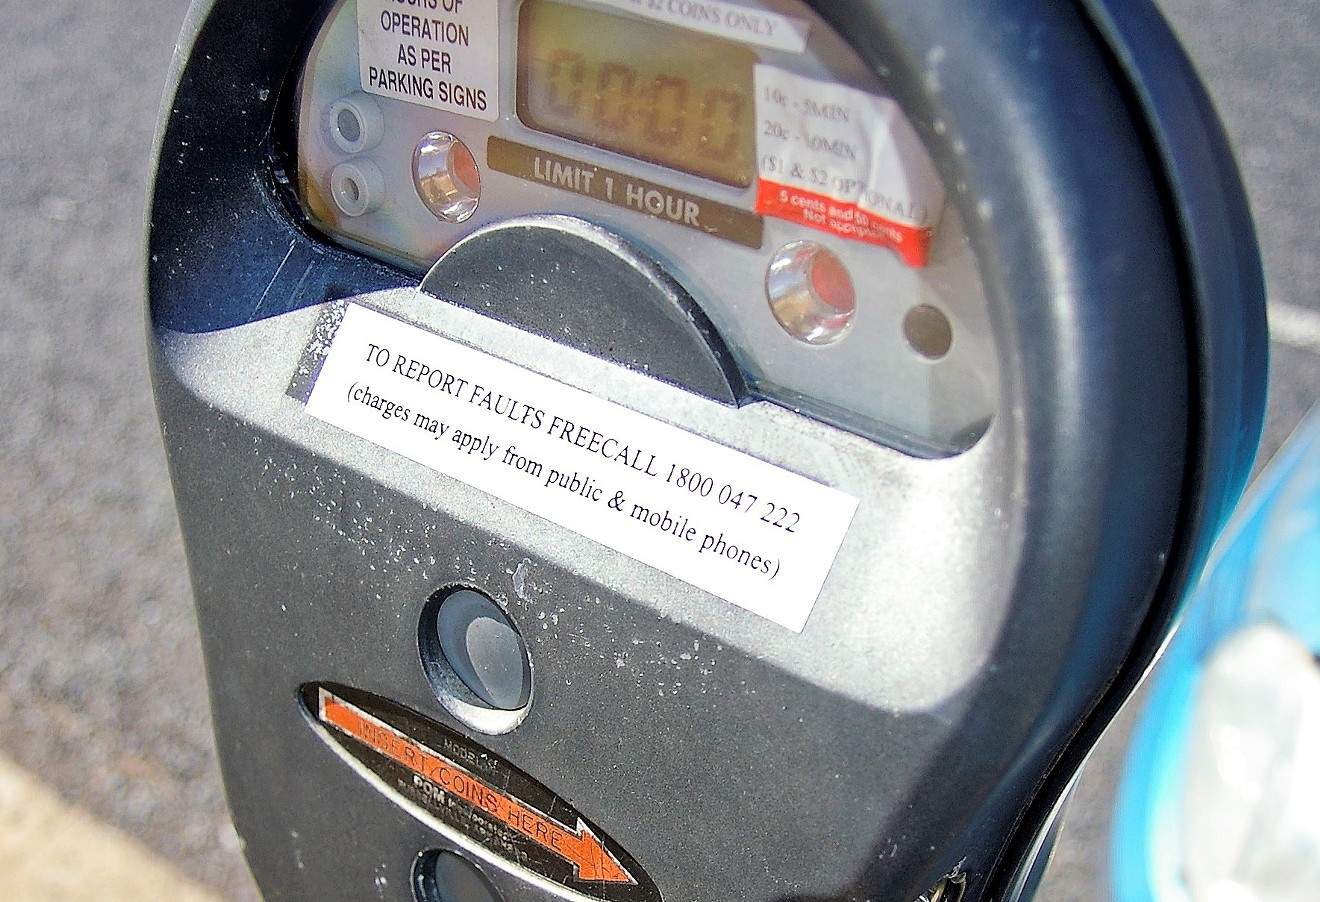 The Chicago parking meter farce is a cautionary tale of privatization.